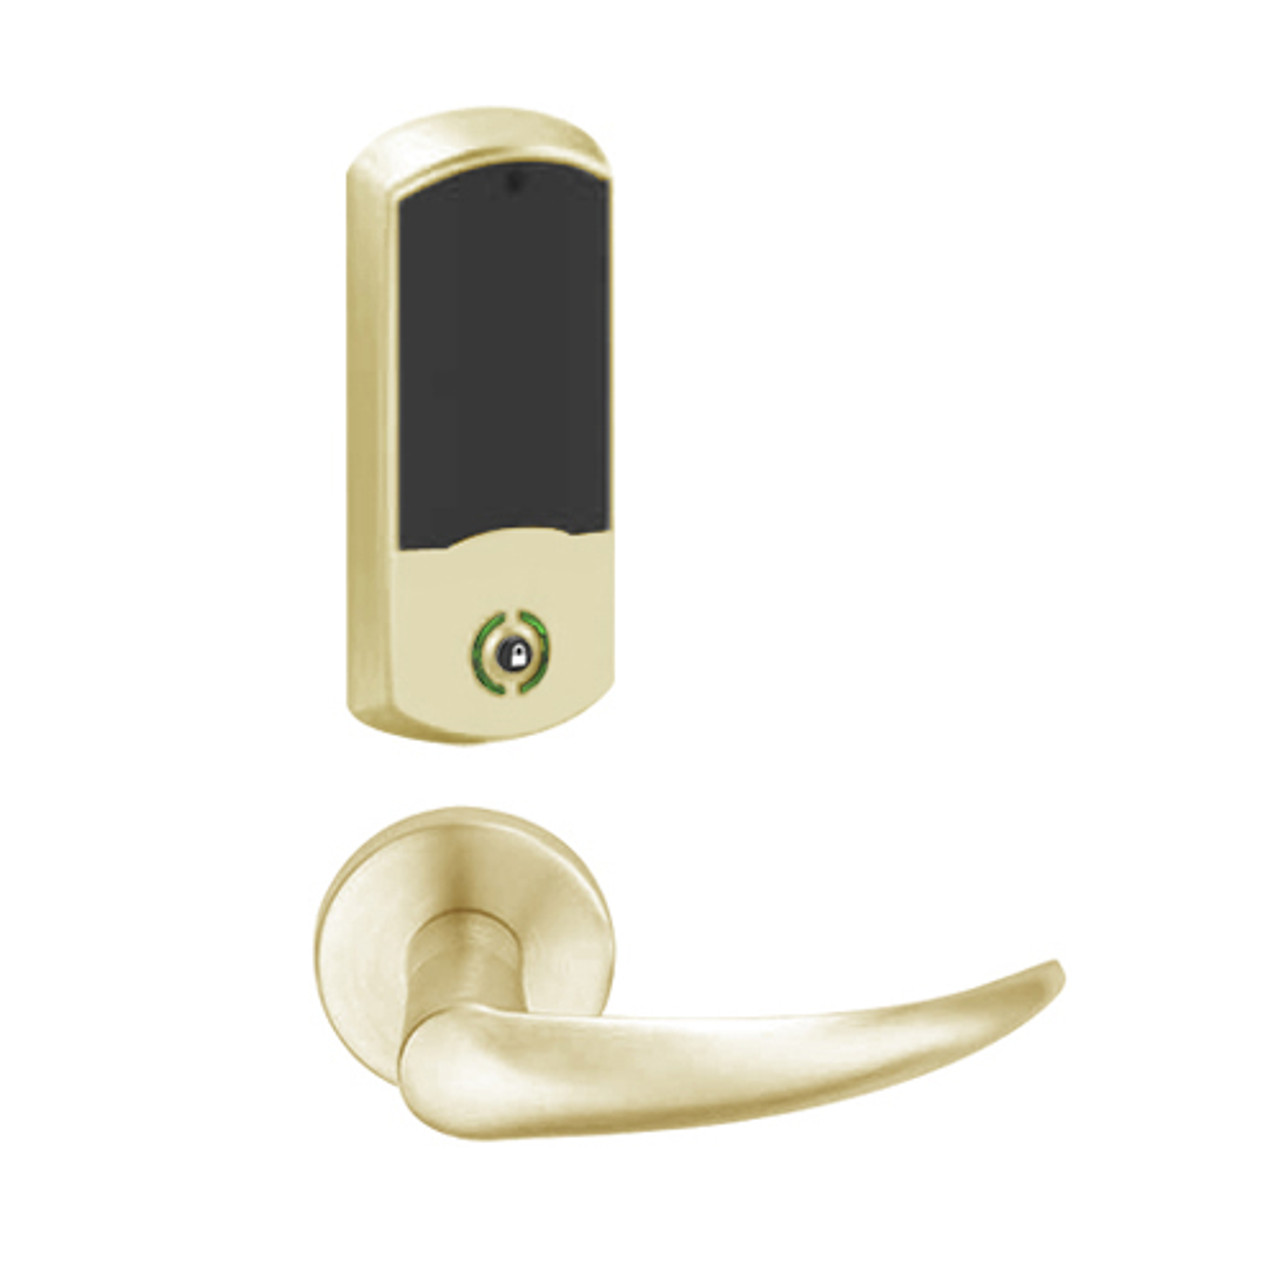 LEMB-GRW-L-OME-606-00B Schlage Less Cylinder Privacy/Office Wireless Greenwich Mortise Lock with LED Indicator and Omega Lever in Satin Brass